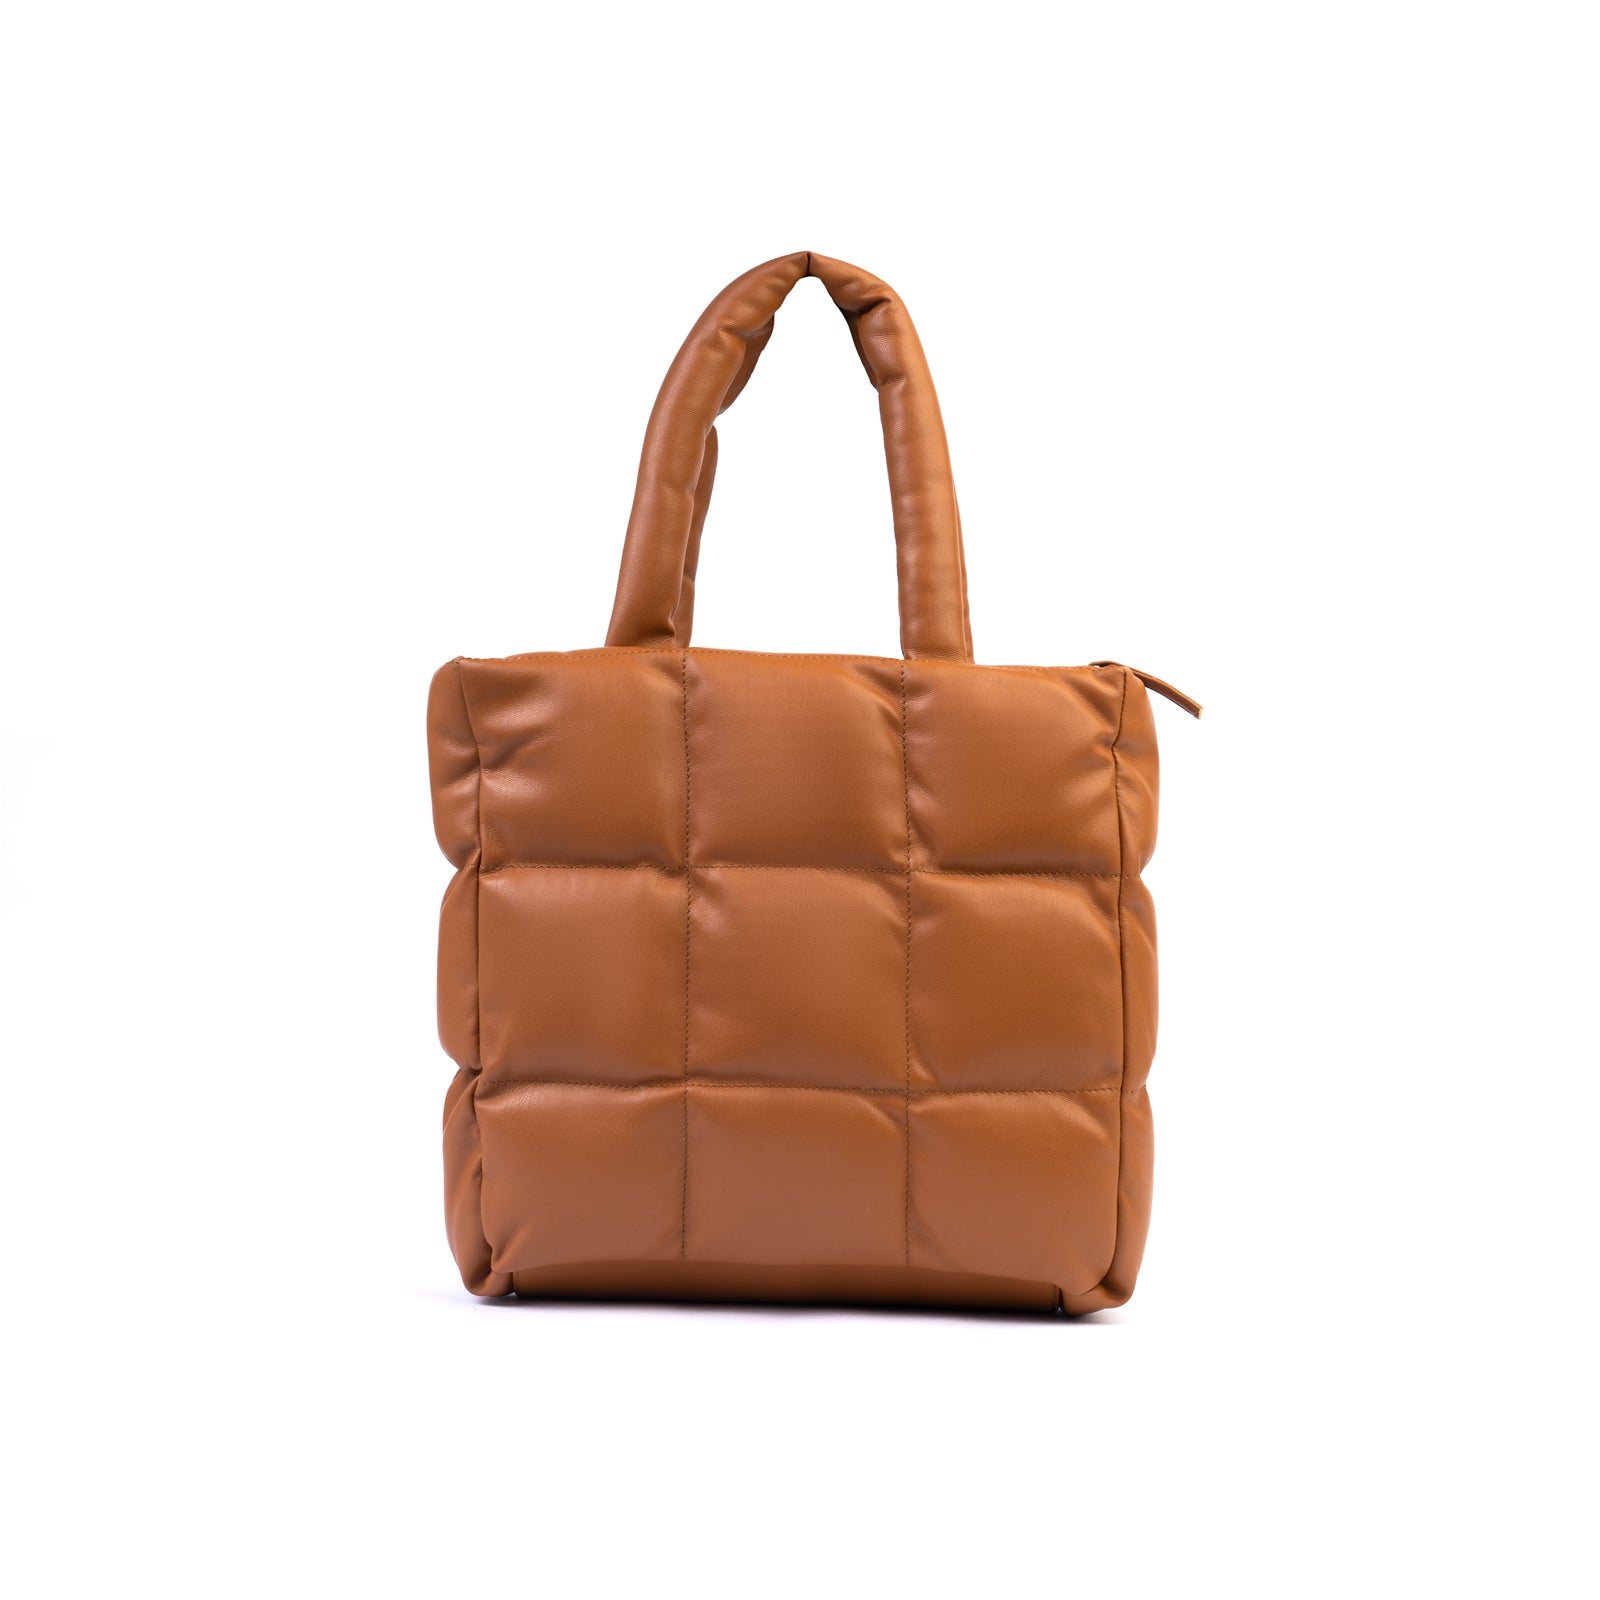 TAN QUILTED SQUARE TOTE BAG